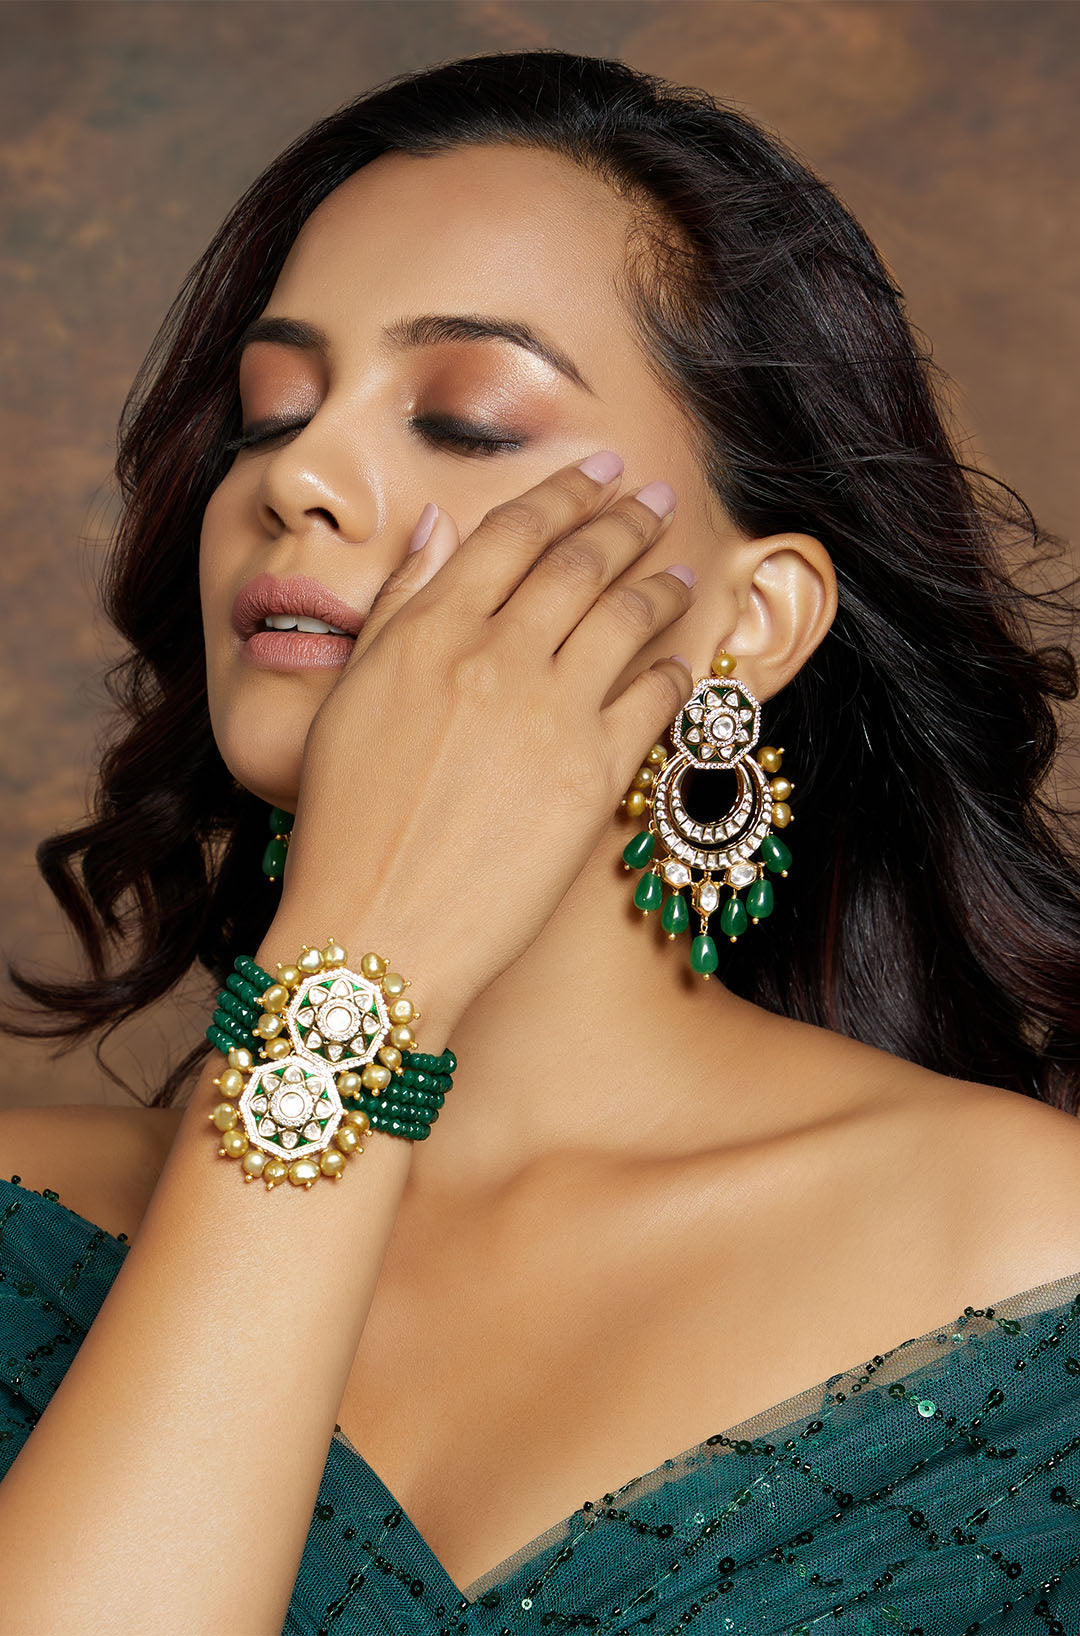 All You Need to Know About Bangles and How to Style Them